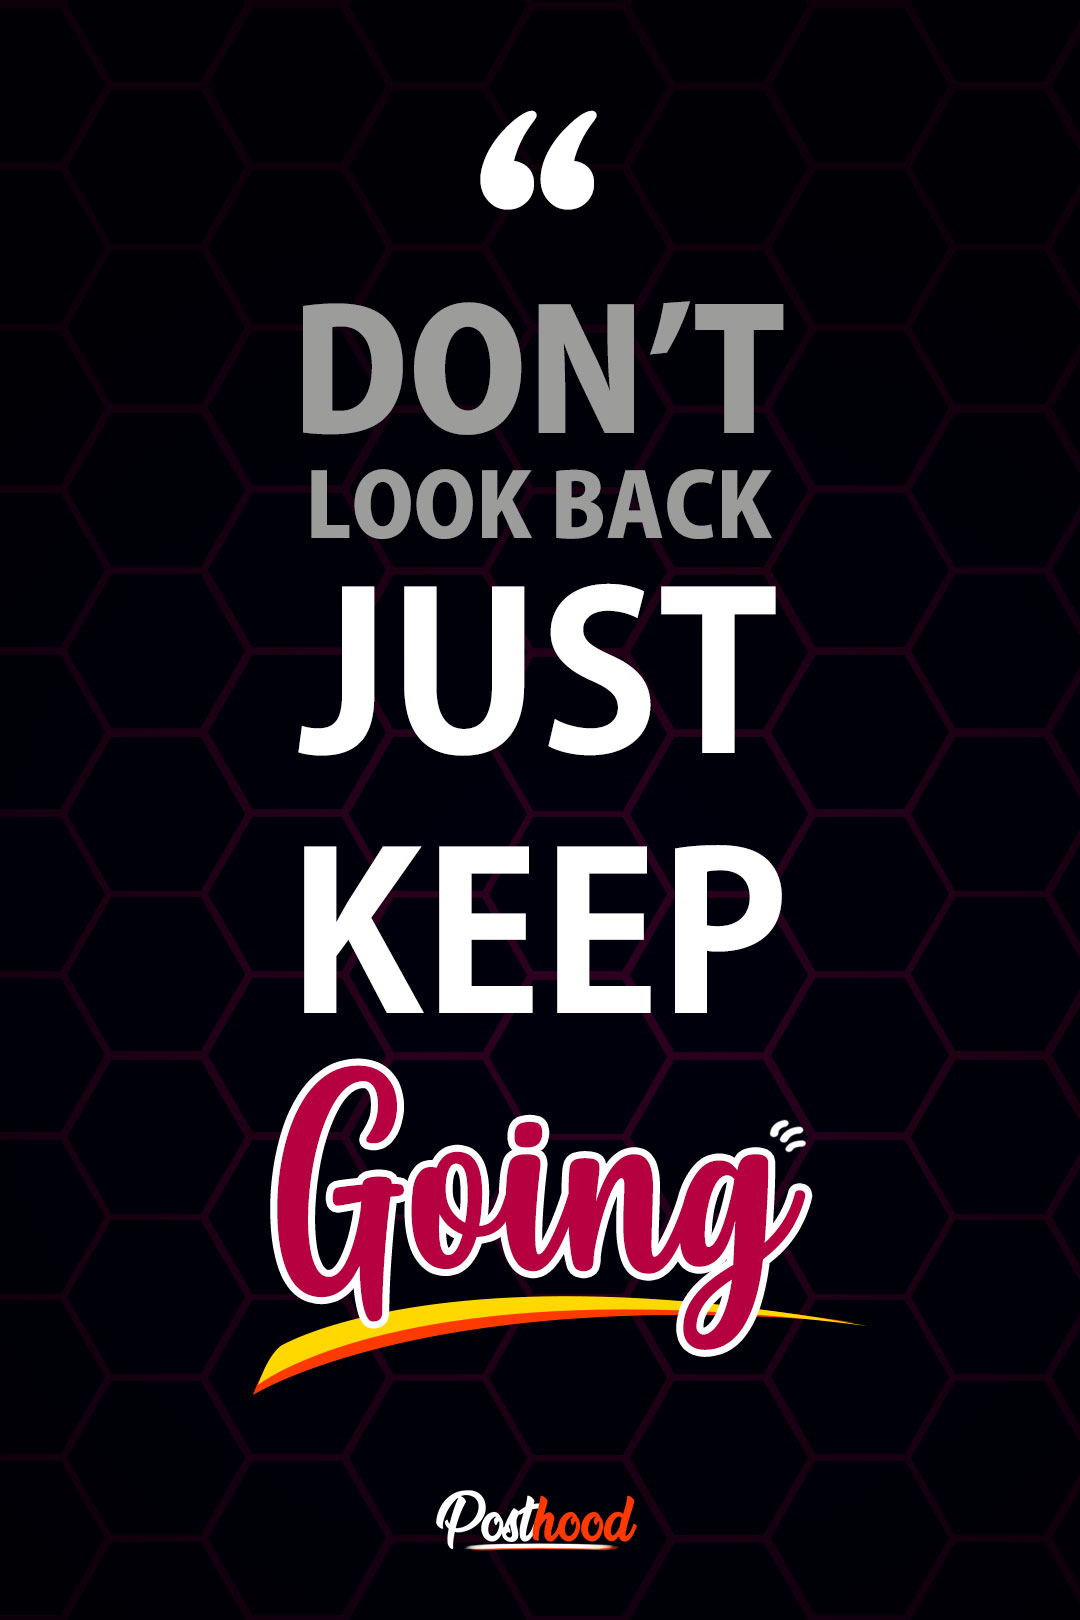 Don’t Look Back, Just Keep Going. Set These Fitness Motivation Quotes on your wall and keep moving. Inspiring Quotes to motivate you to keep going.